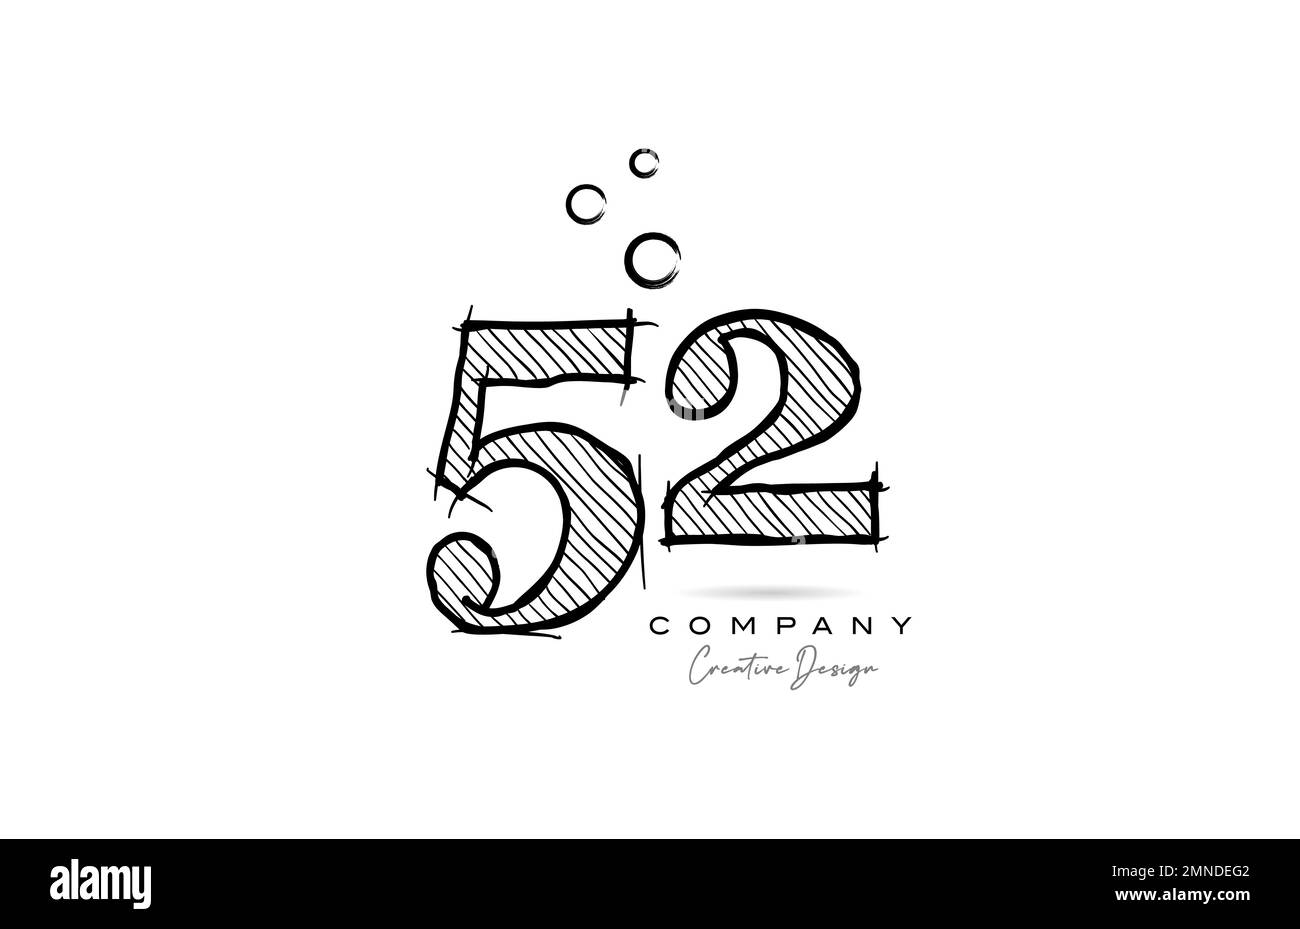 hand drawing number 52 logo icon design for company template or business. Creative logotype in pencil style Stock Vector